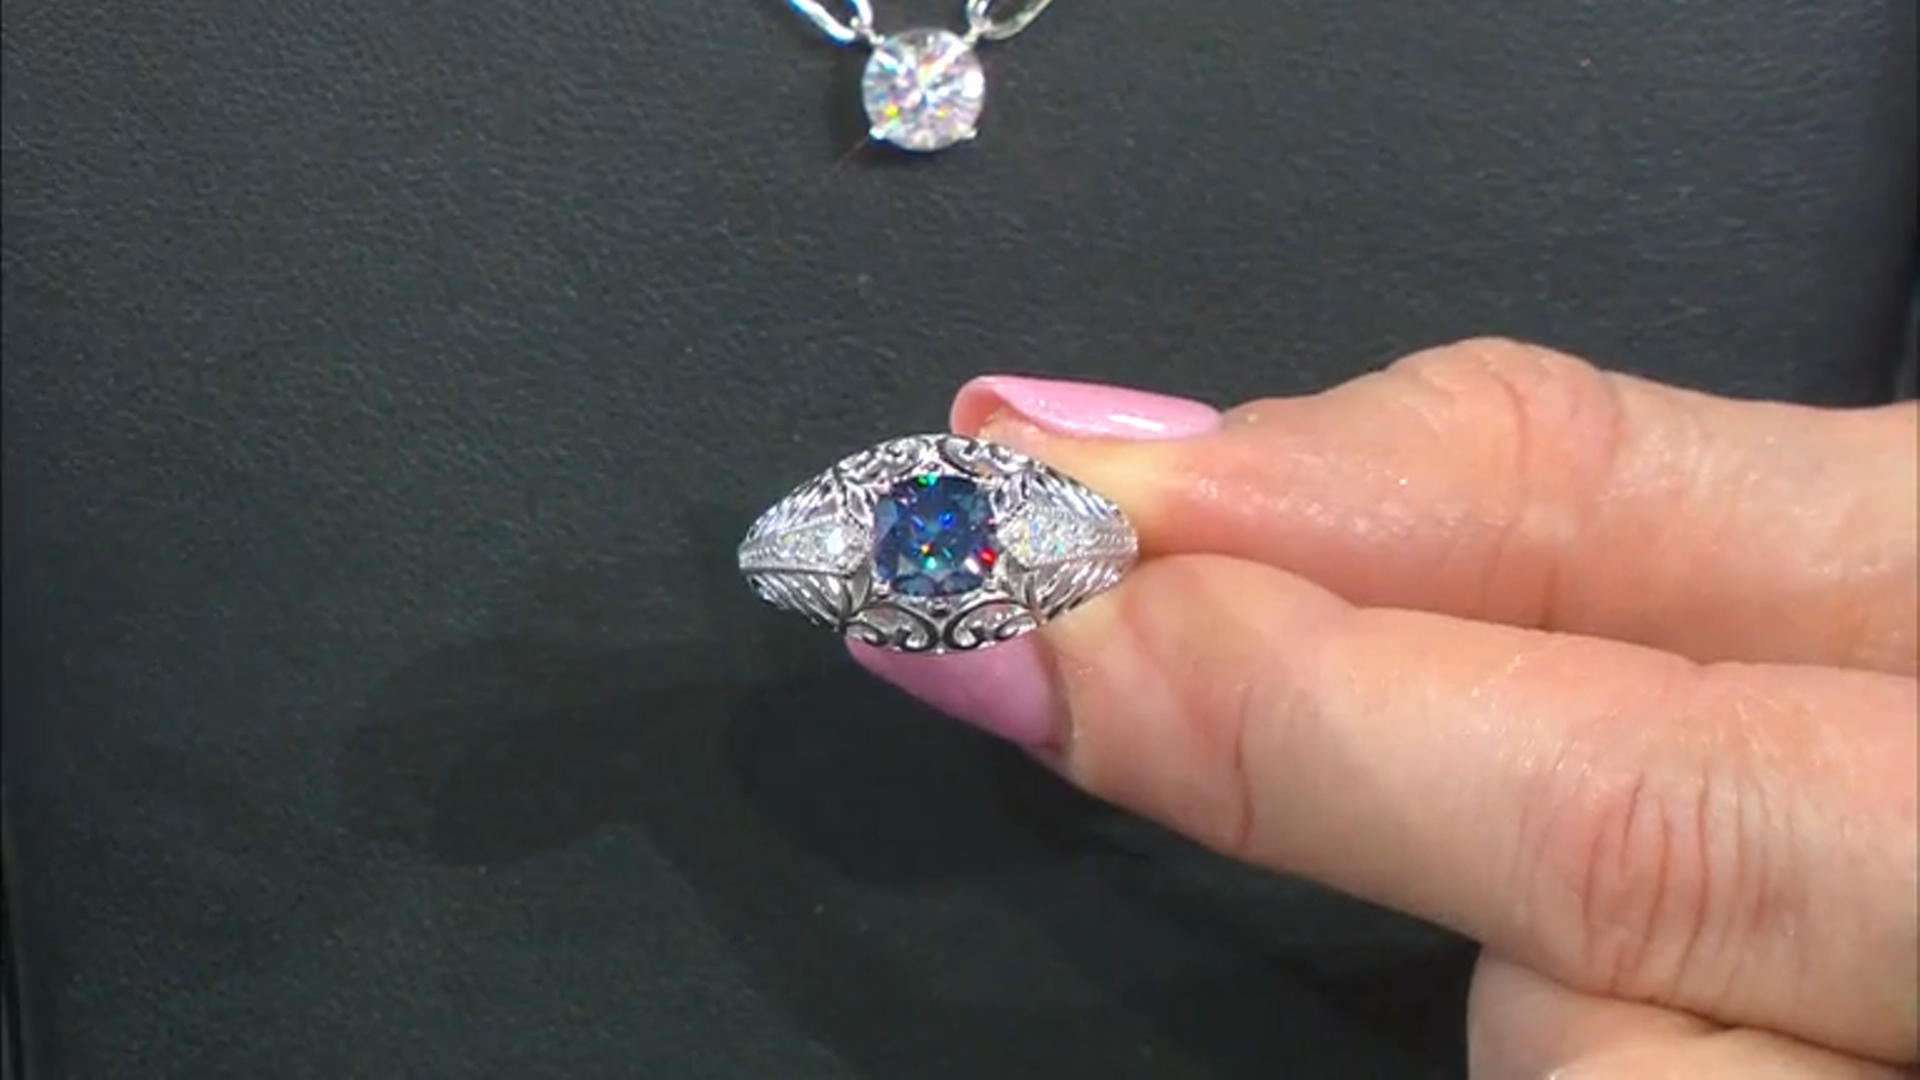 Blue and Colorless Moissanite Platineve Ring 1.44ctw DEW. Video Thumbnail